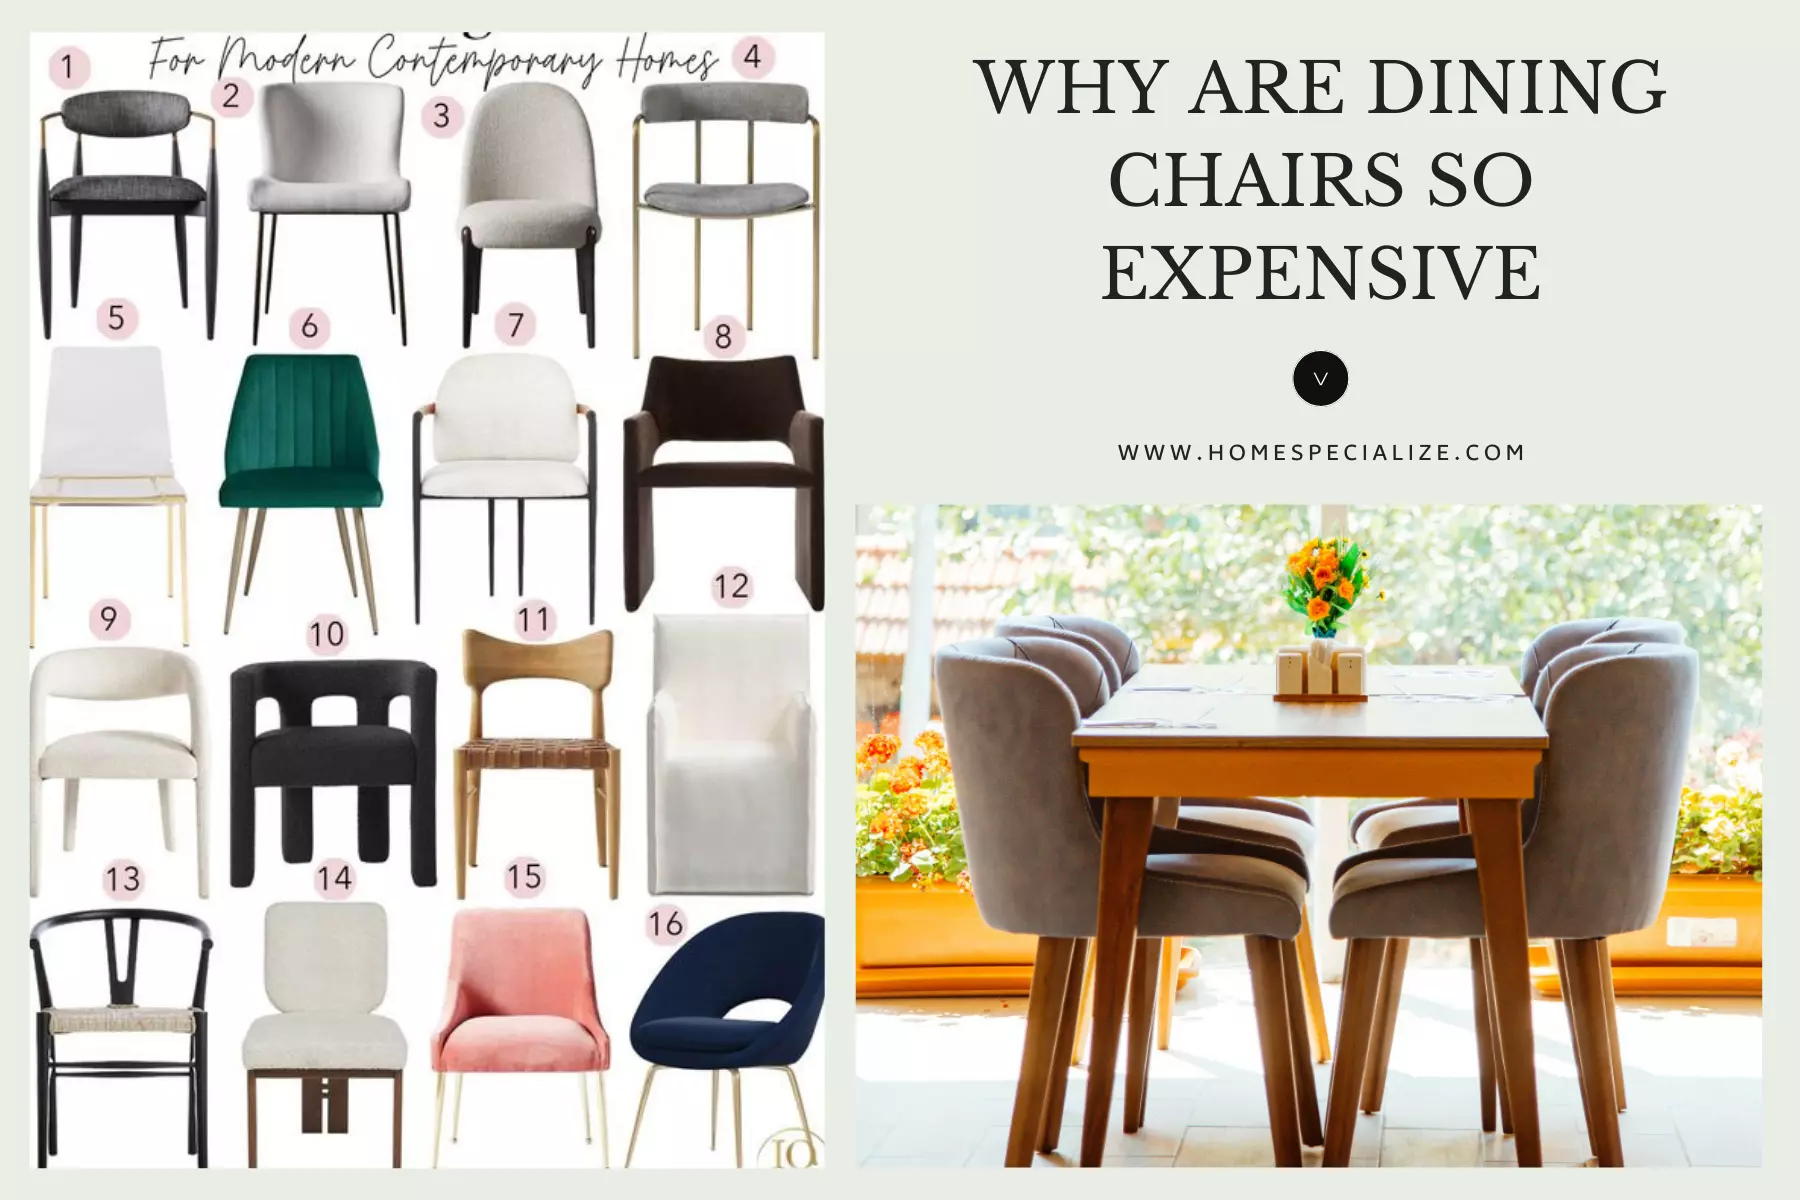 Why are dining chairs so expensive